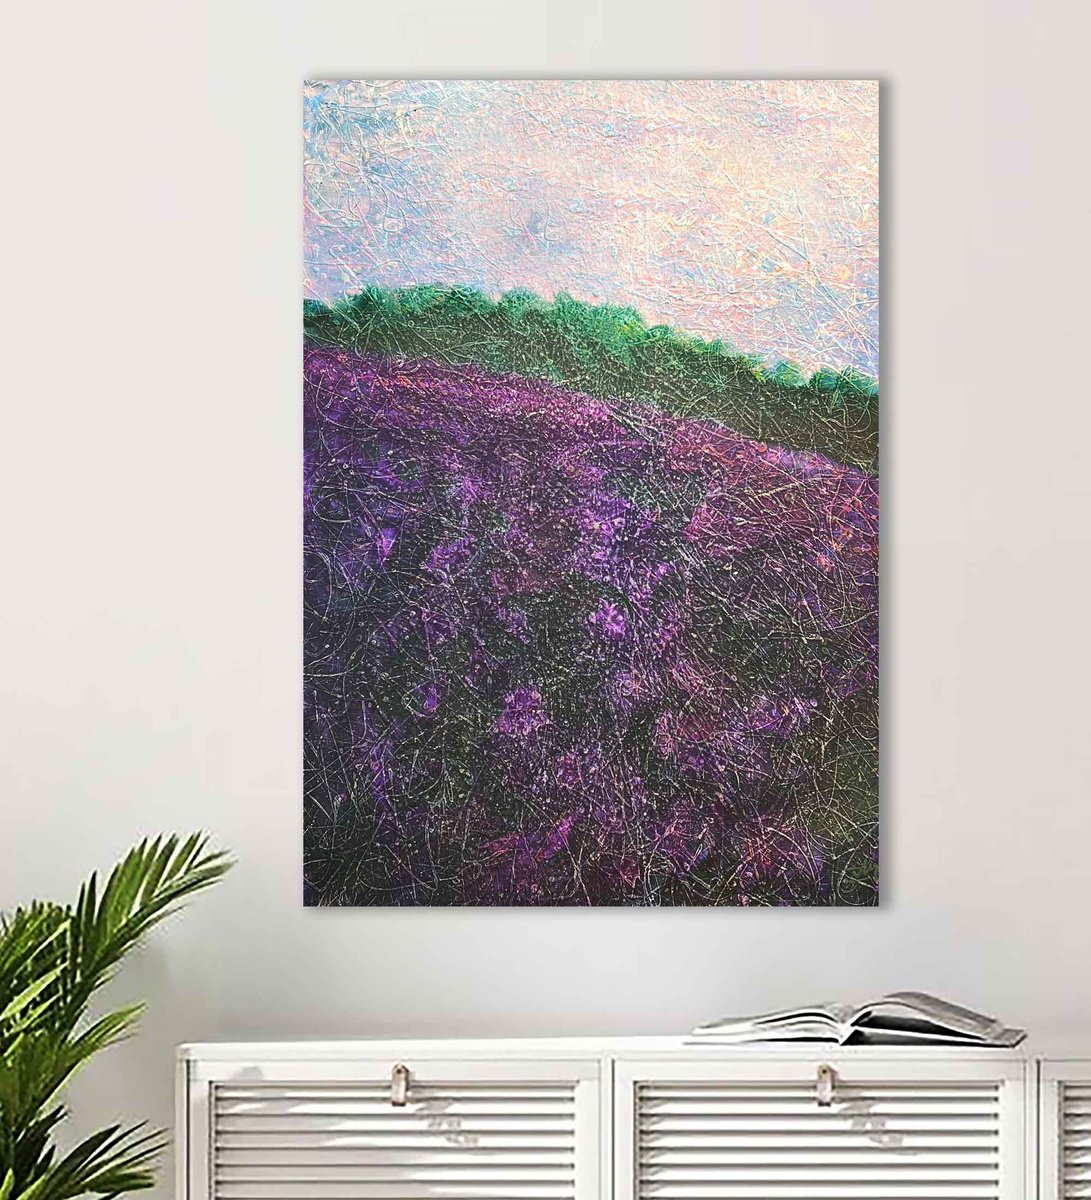 Twilight in the lavender field by Nadins ART